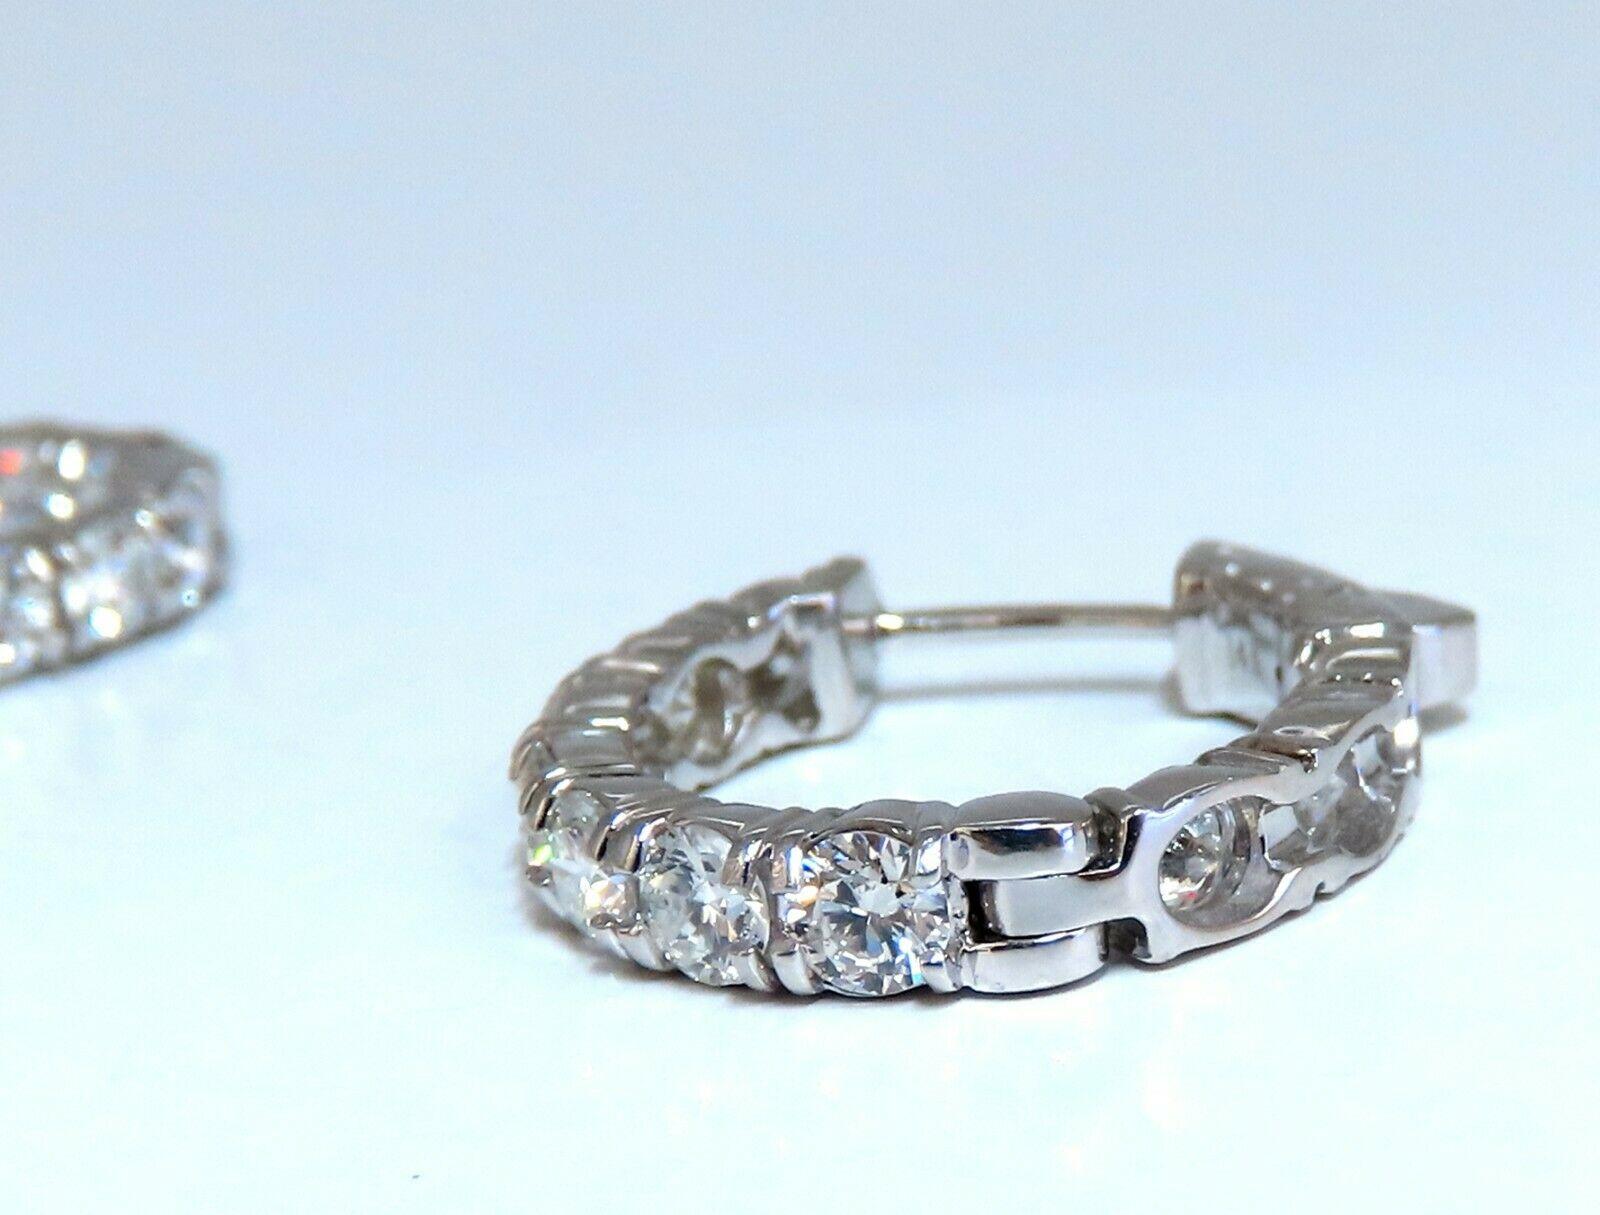 Elongated natural diamond hoop earrings.

Sharing prong design

2.93 carat round brilliant diamonds

G color vs2 clarity

14 karat white gold 6.1gram

20mm wide front to back

20mm top to bottom

3.7 mm thick at Diamond row

Push button snap